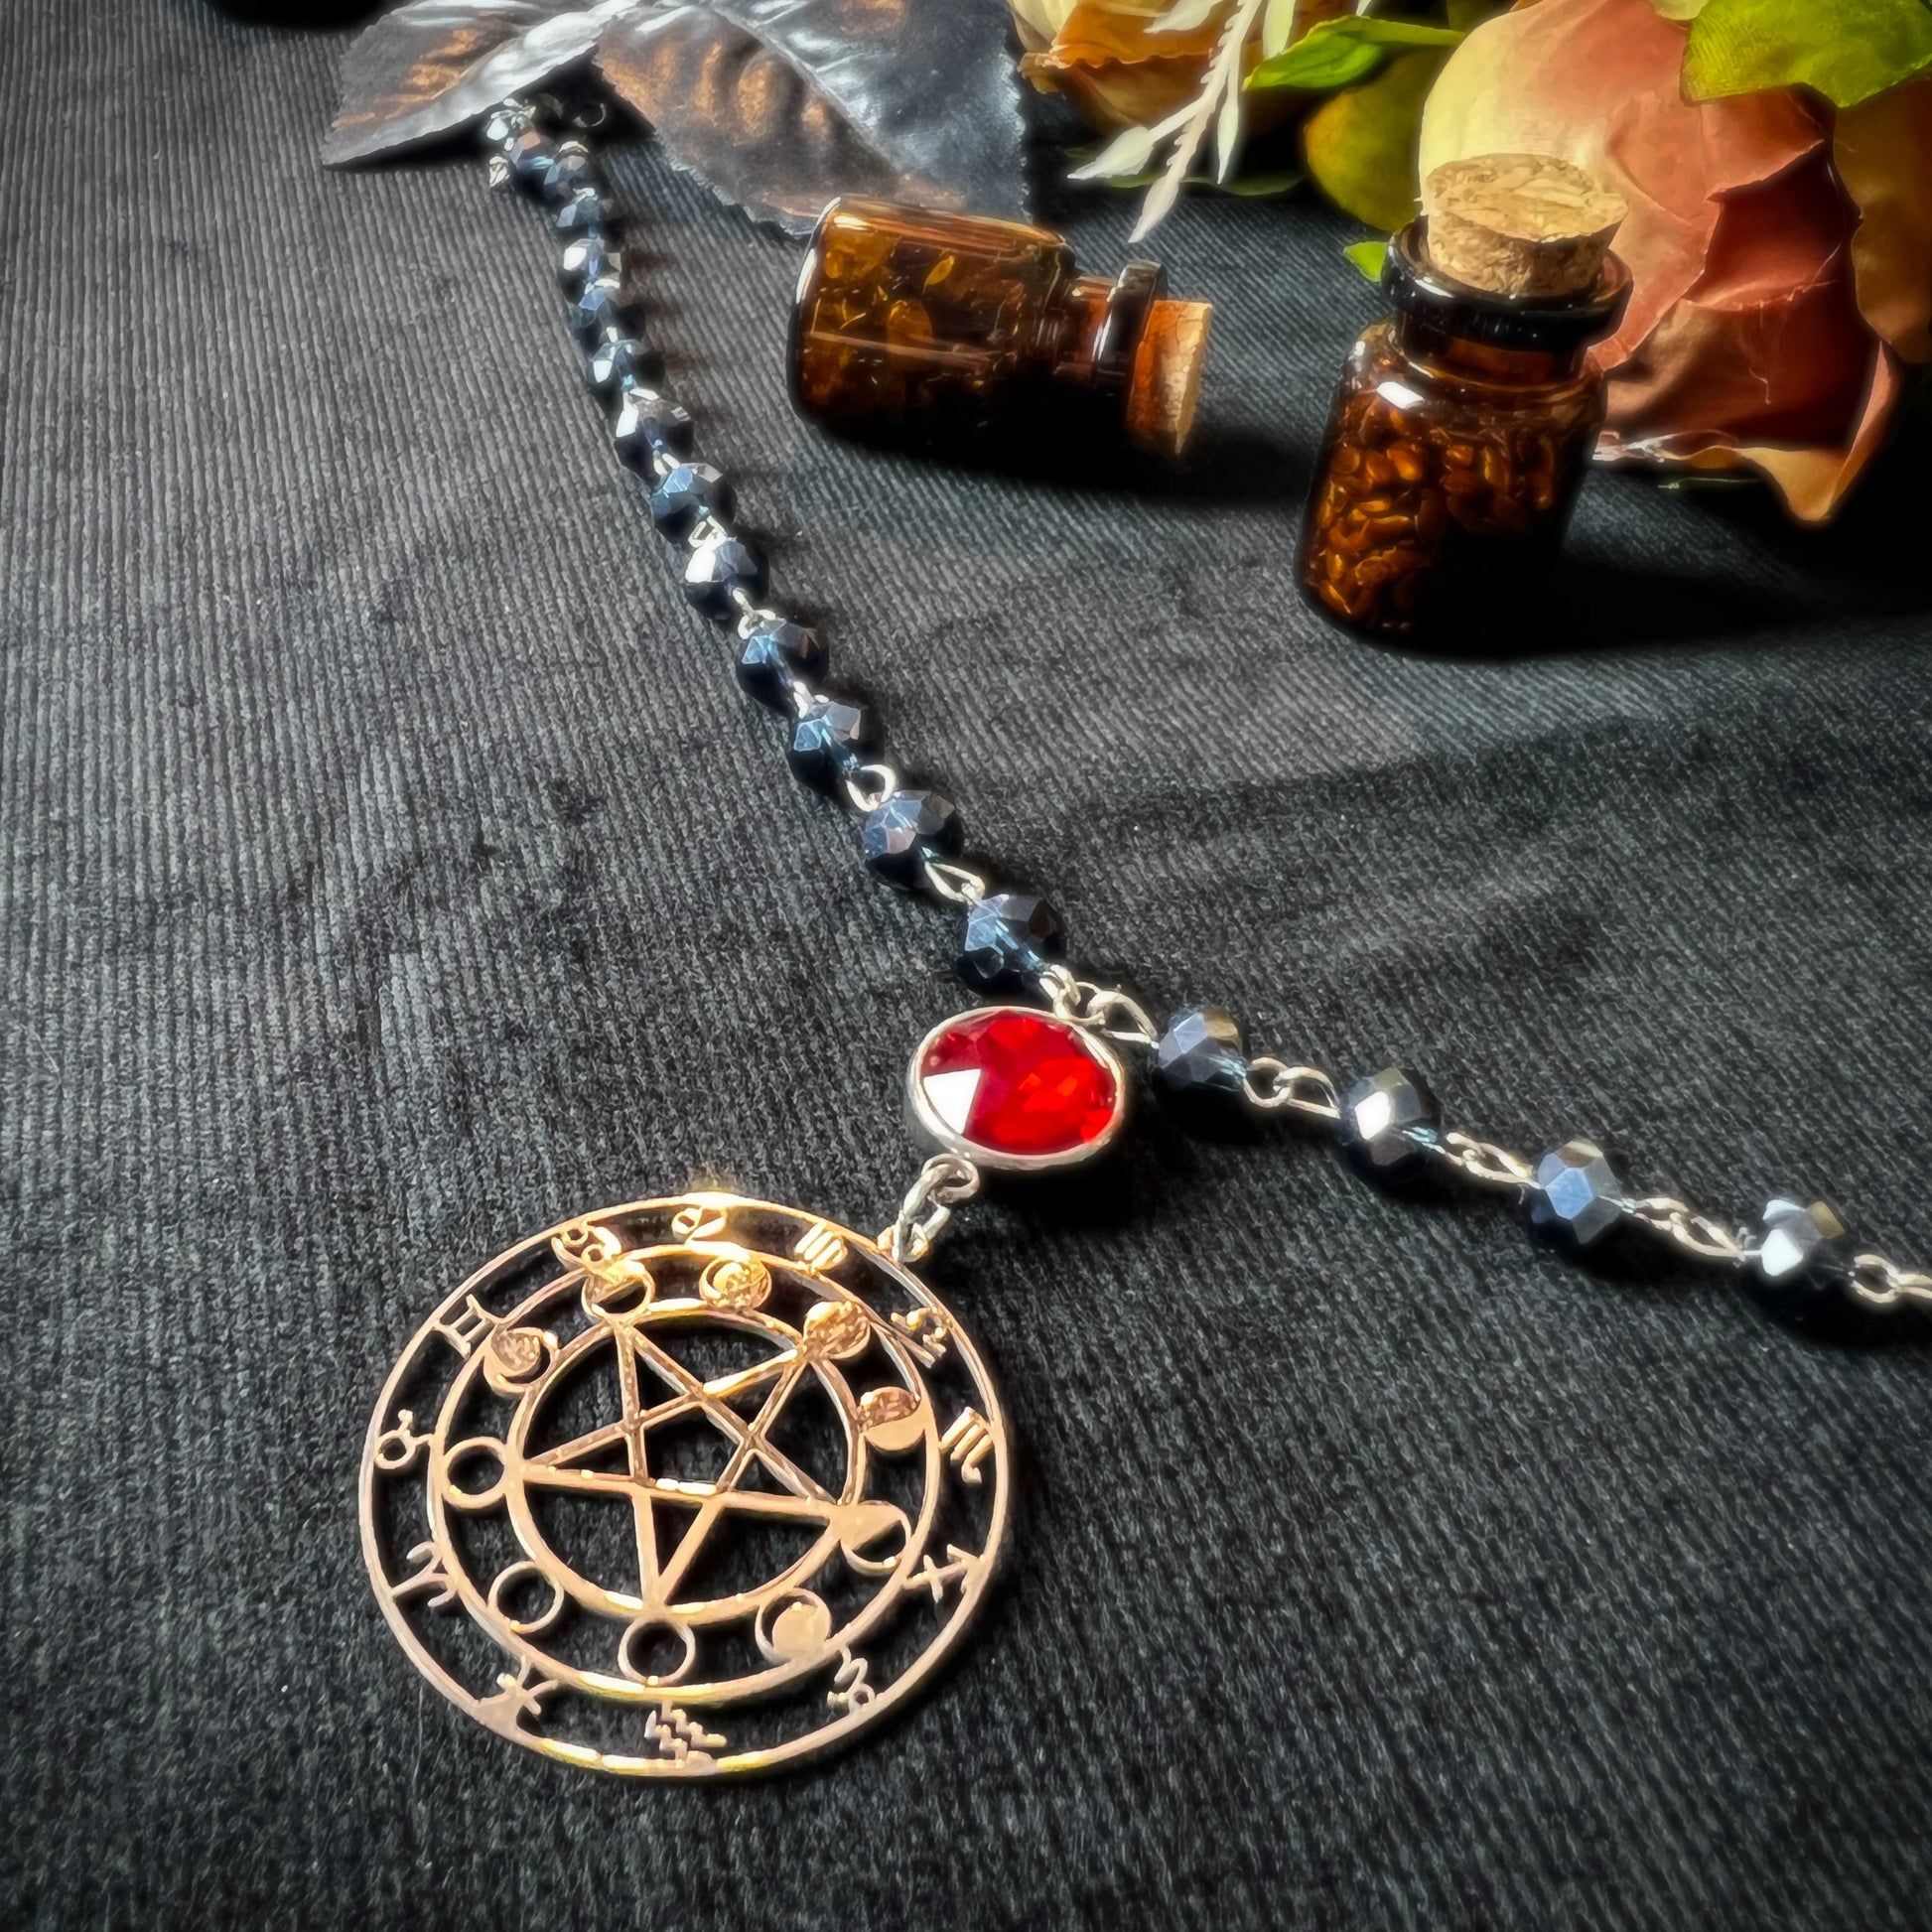 Pentacle, Moon phases and Zodiac signs rosary style choker Baguette Magick